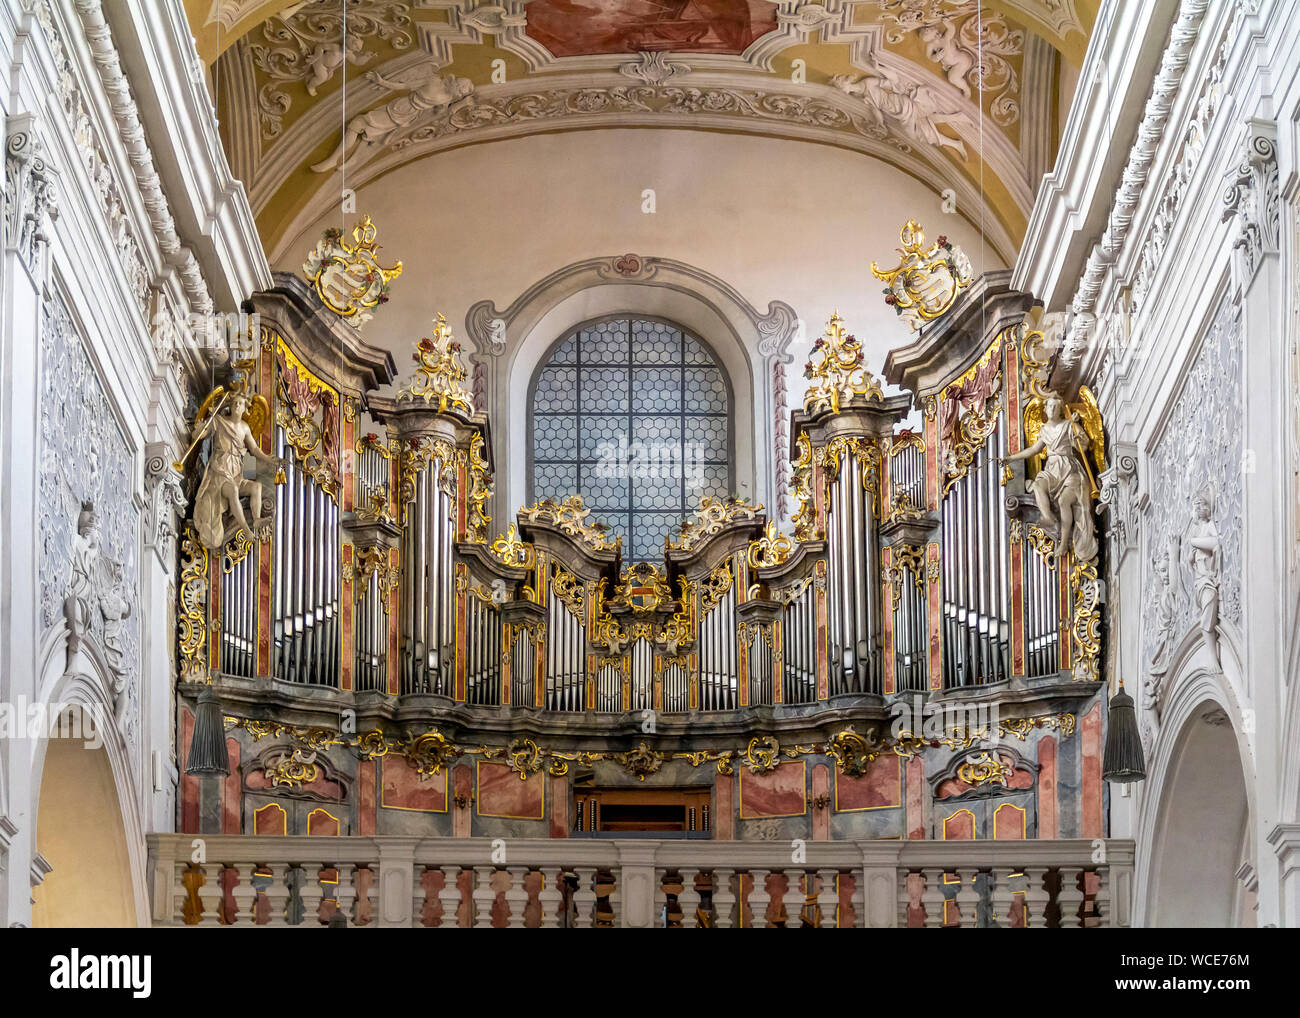 interior of the Bamberg Cathedral, a church in Bamberg, Germany Stock Photo